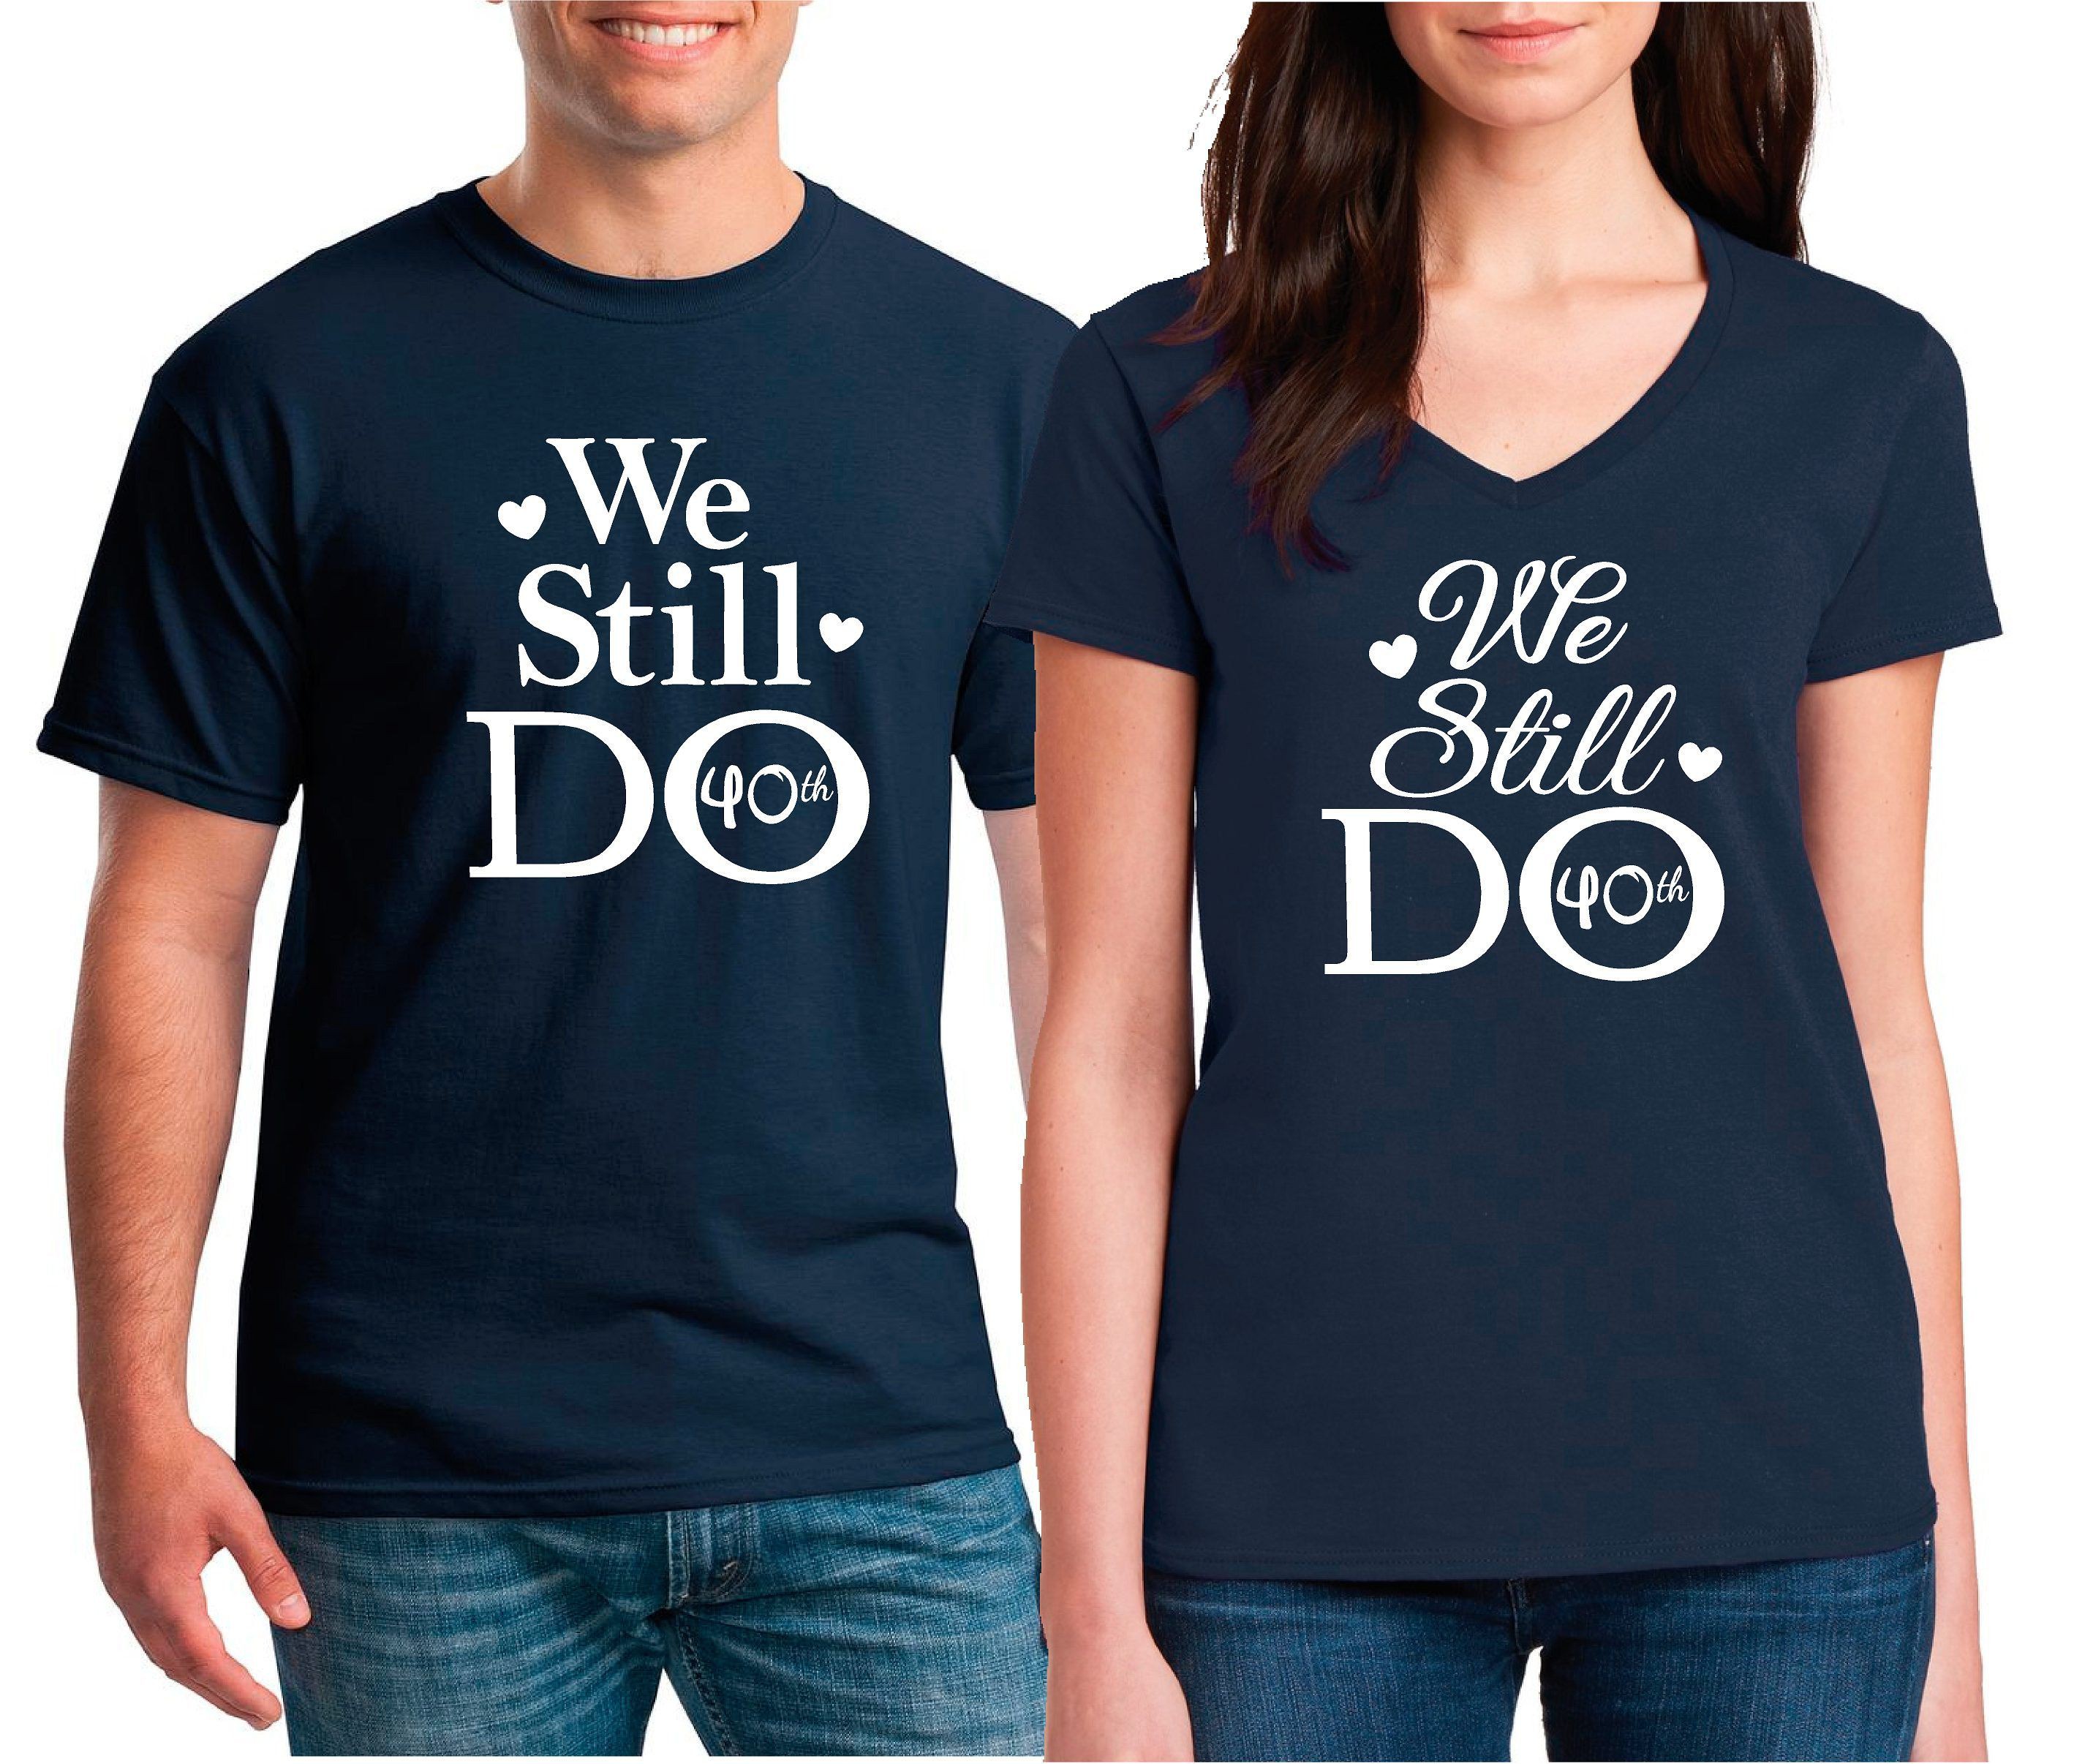 Anniversary t shirts for couples: couple outfits,  Wedding anniversary  